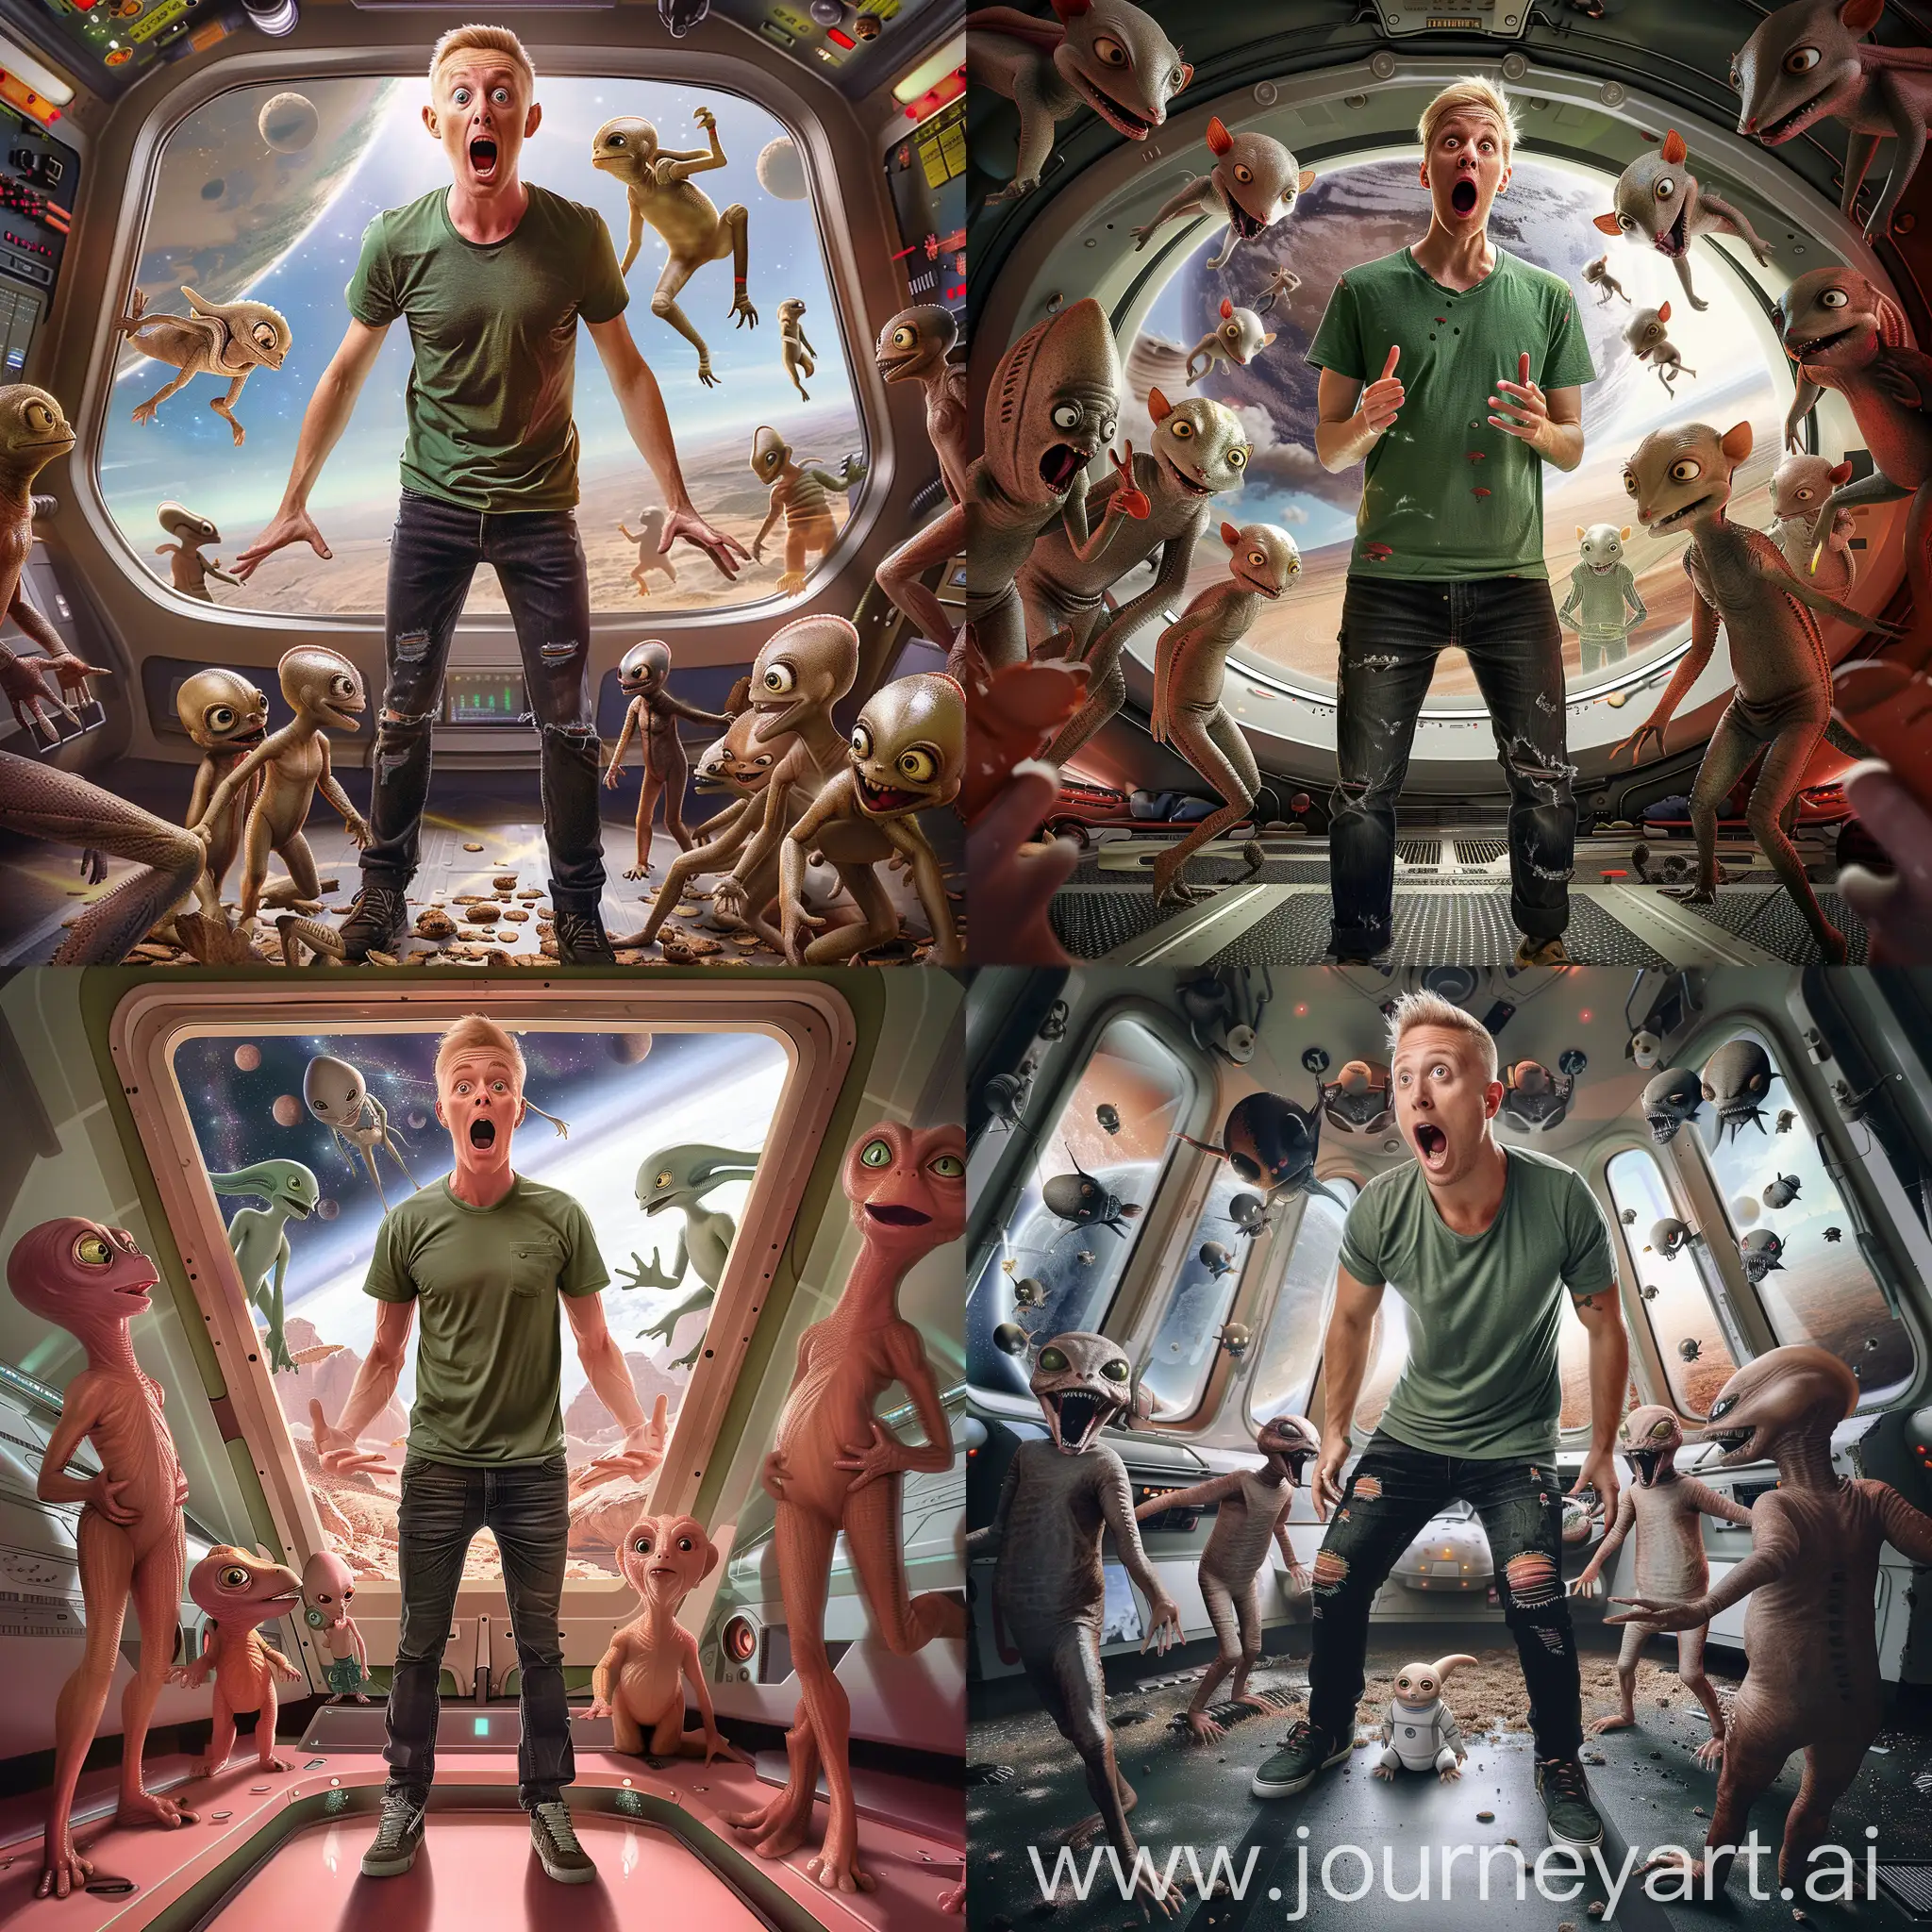 Astounded-Australian-Man-Surrounded-by-Cute-Aliens-in-Spaceship